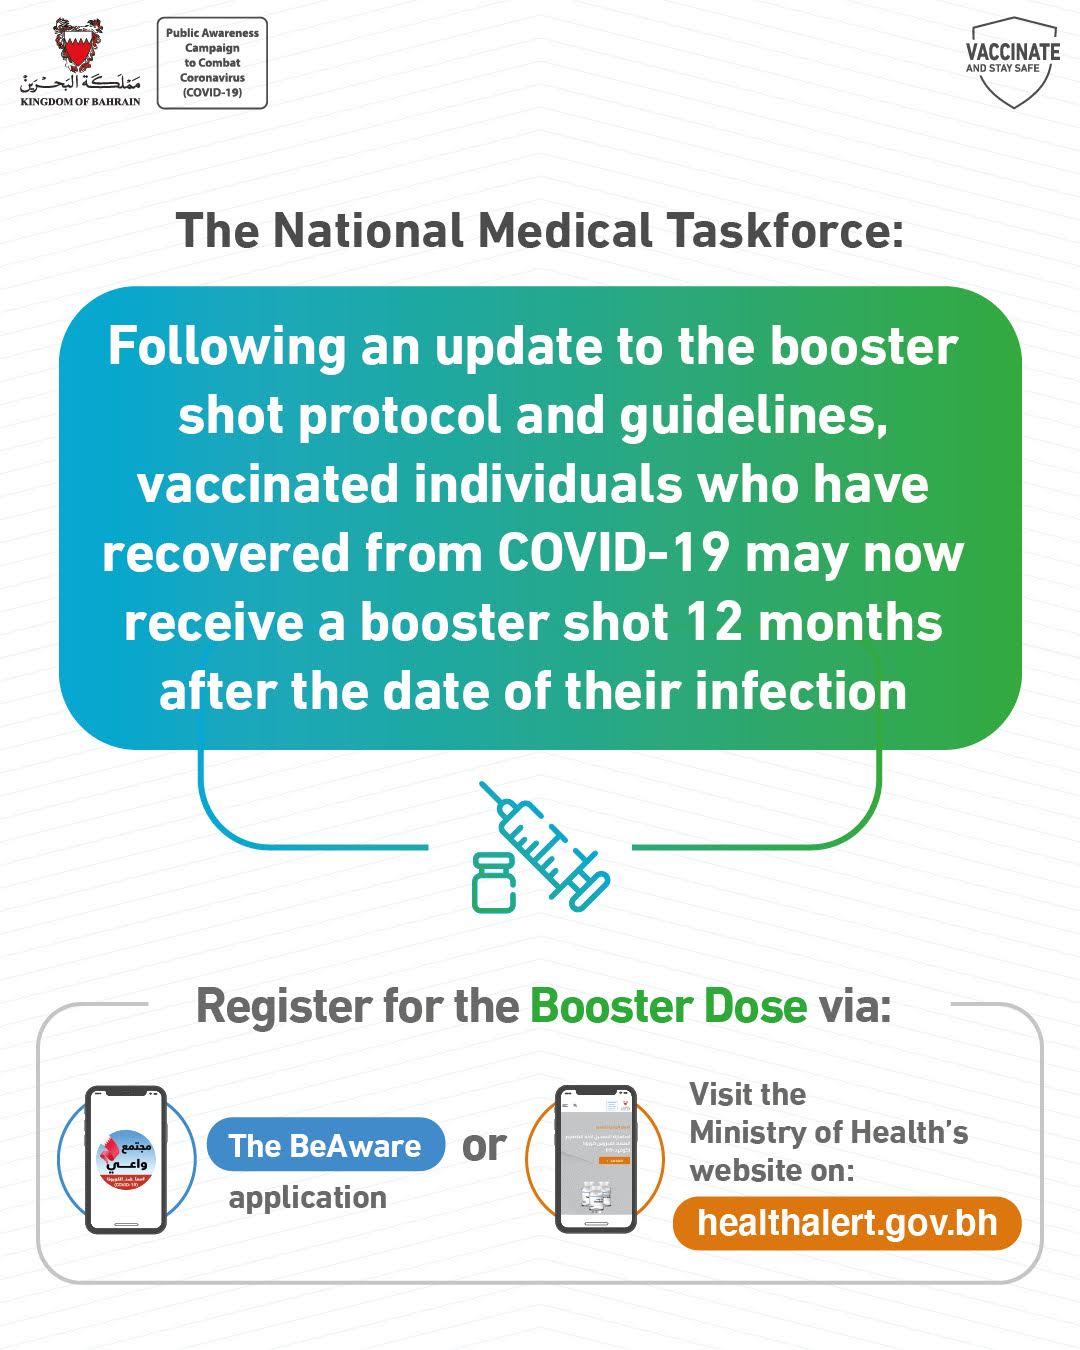 Booster shot protocol updated for vaccinated individuals who have recovered from COVID-19